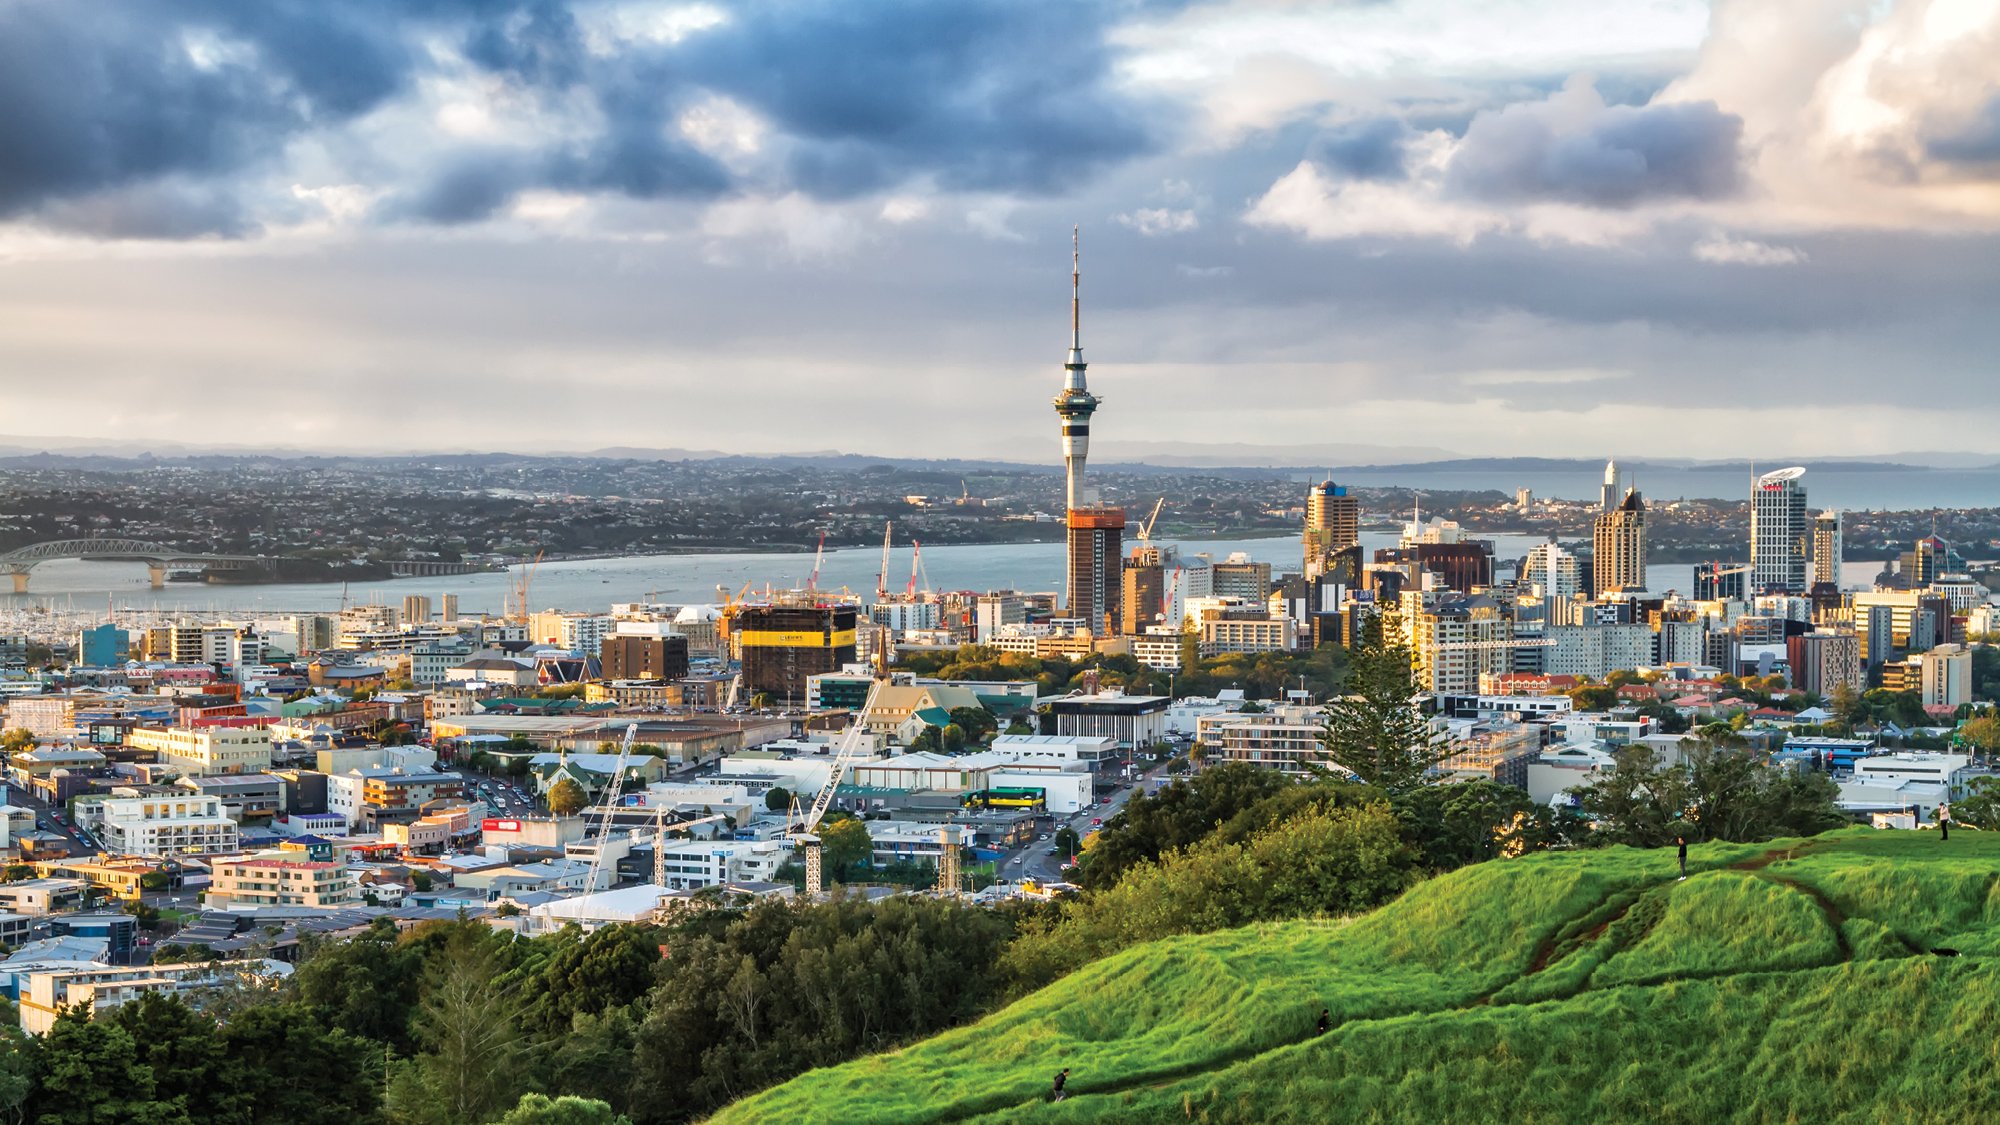 Photograph looking across Auckland city